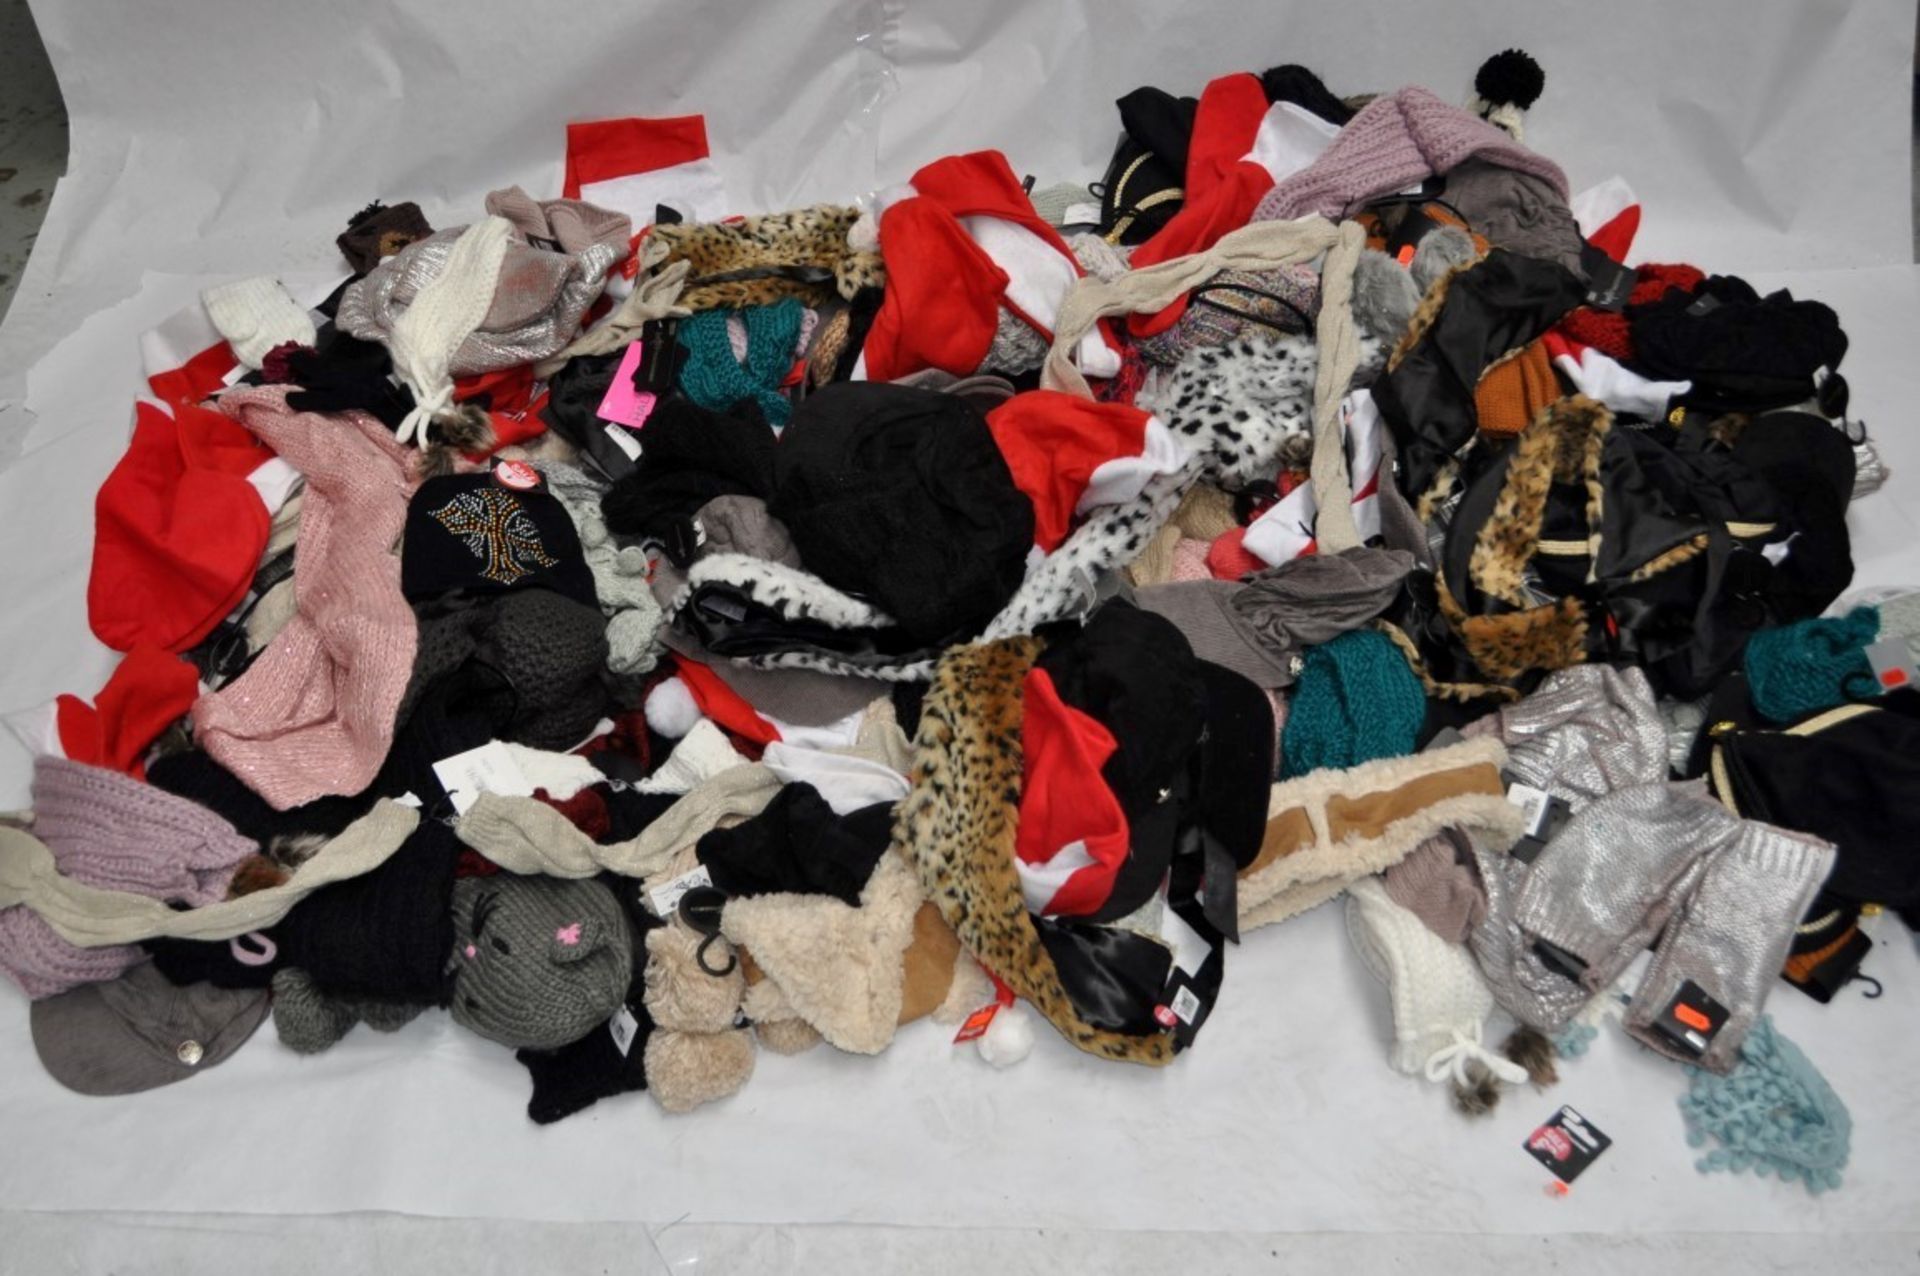 Approx 150 x Items Of Assorted Ladies & Girls Fashion Accessories – Box349 - Inc. Hats, Scarves, - Image 4 of 4